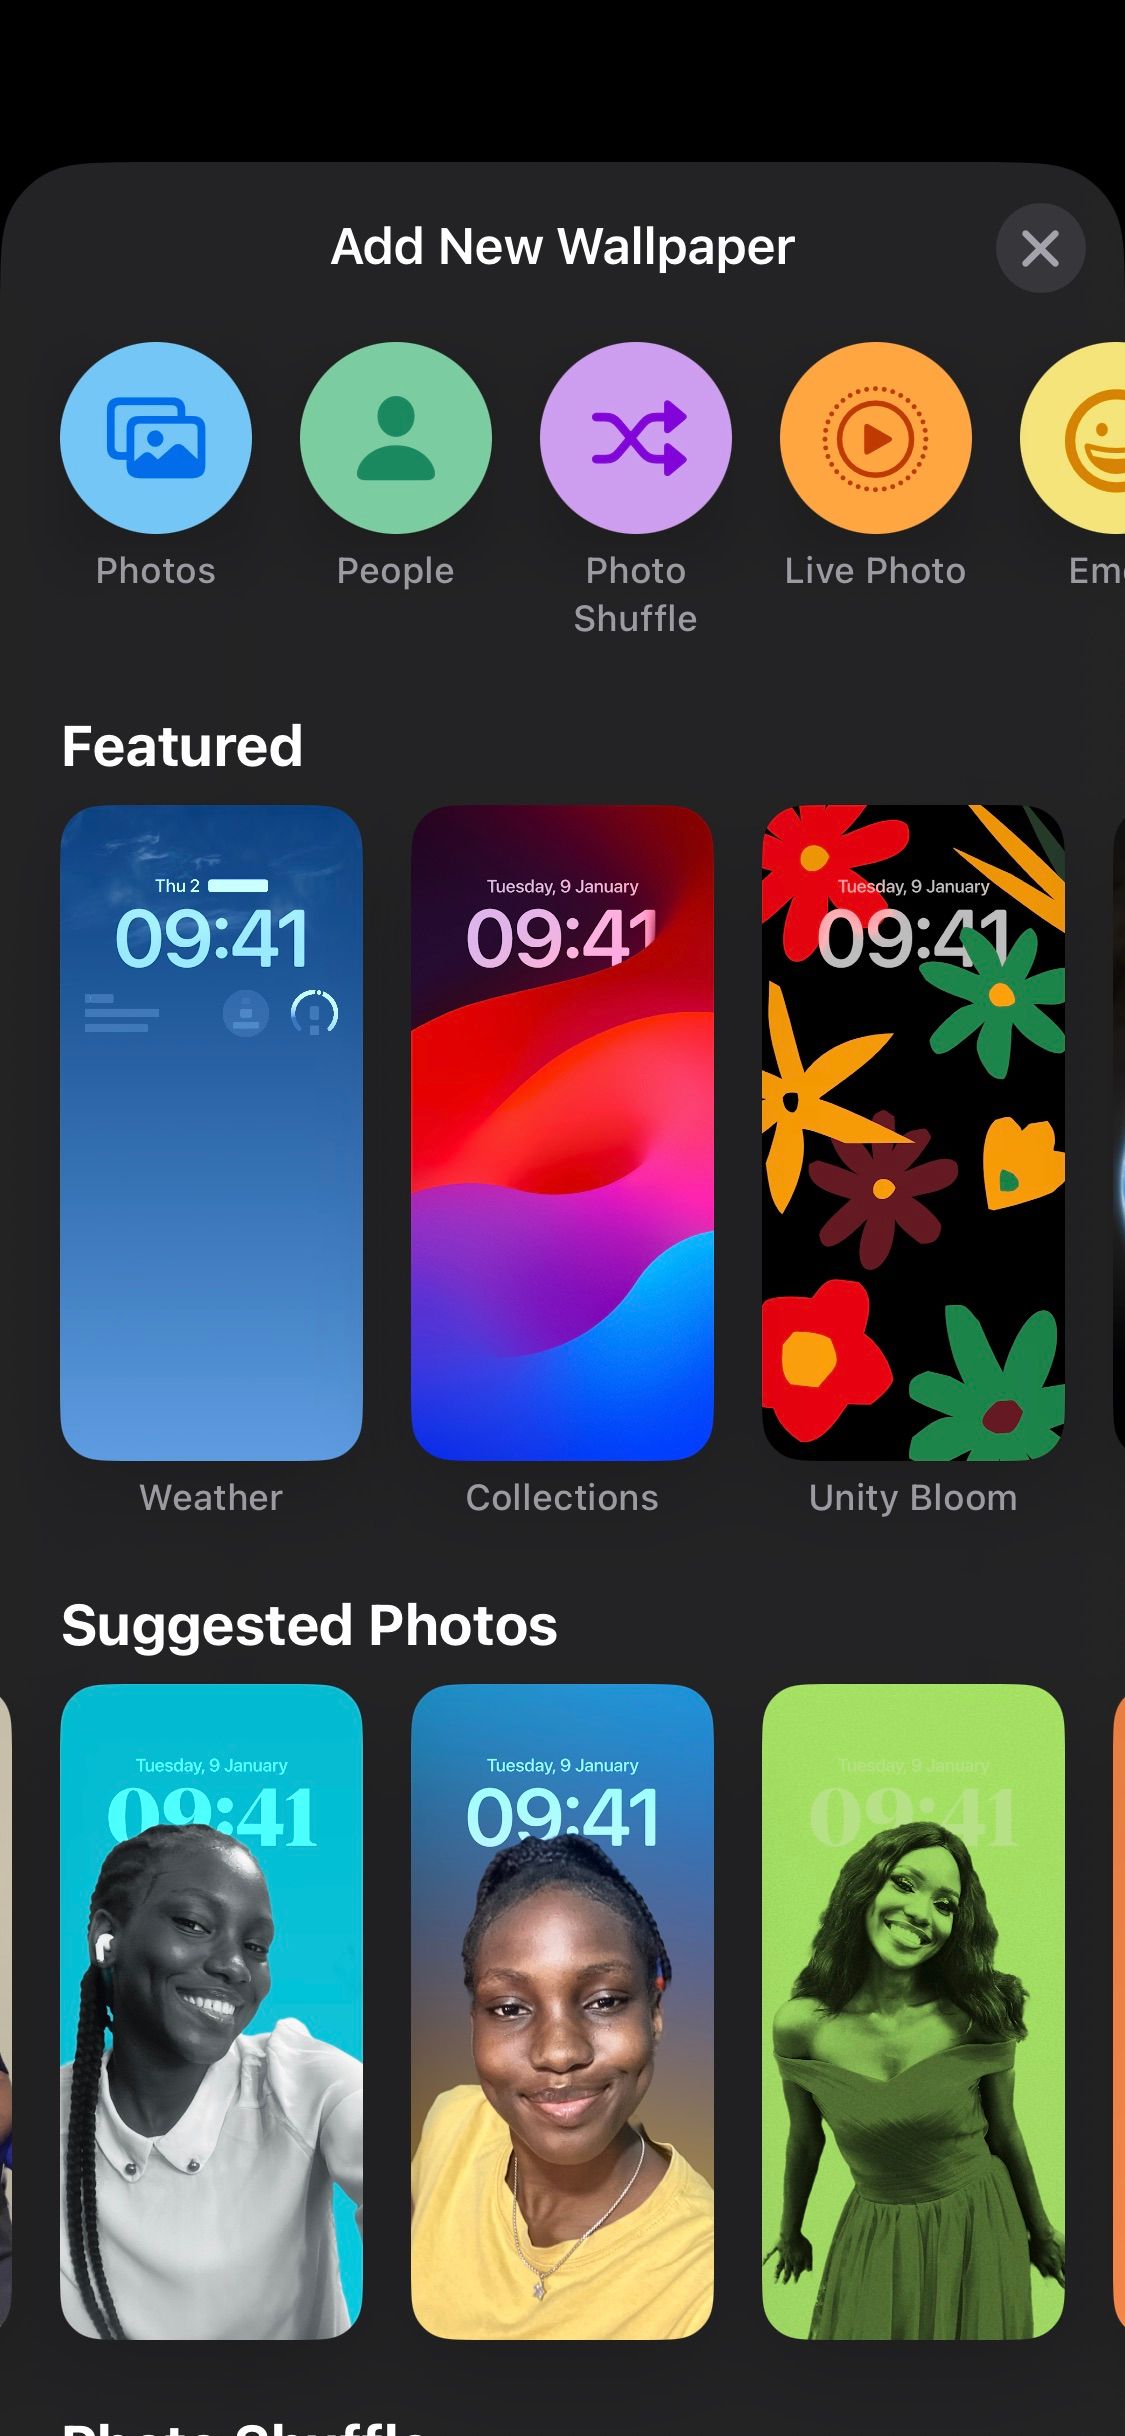 Browsing the available wallpaper options on an iPhone.